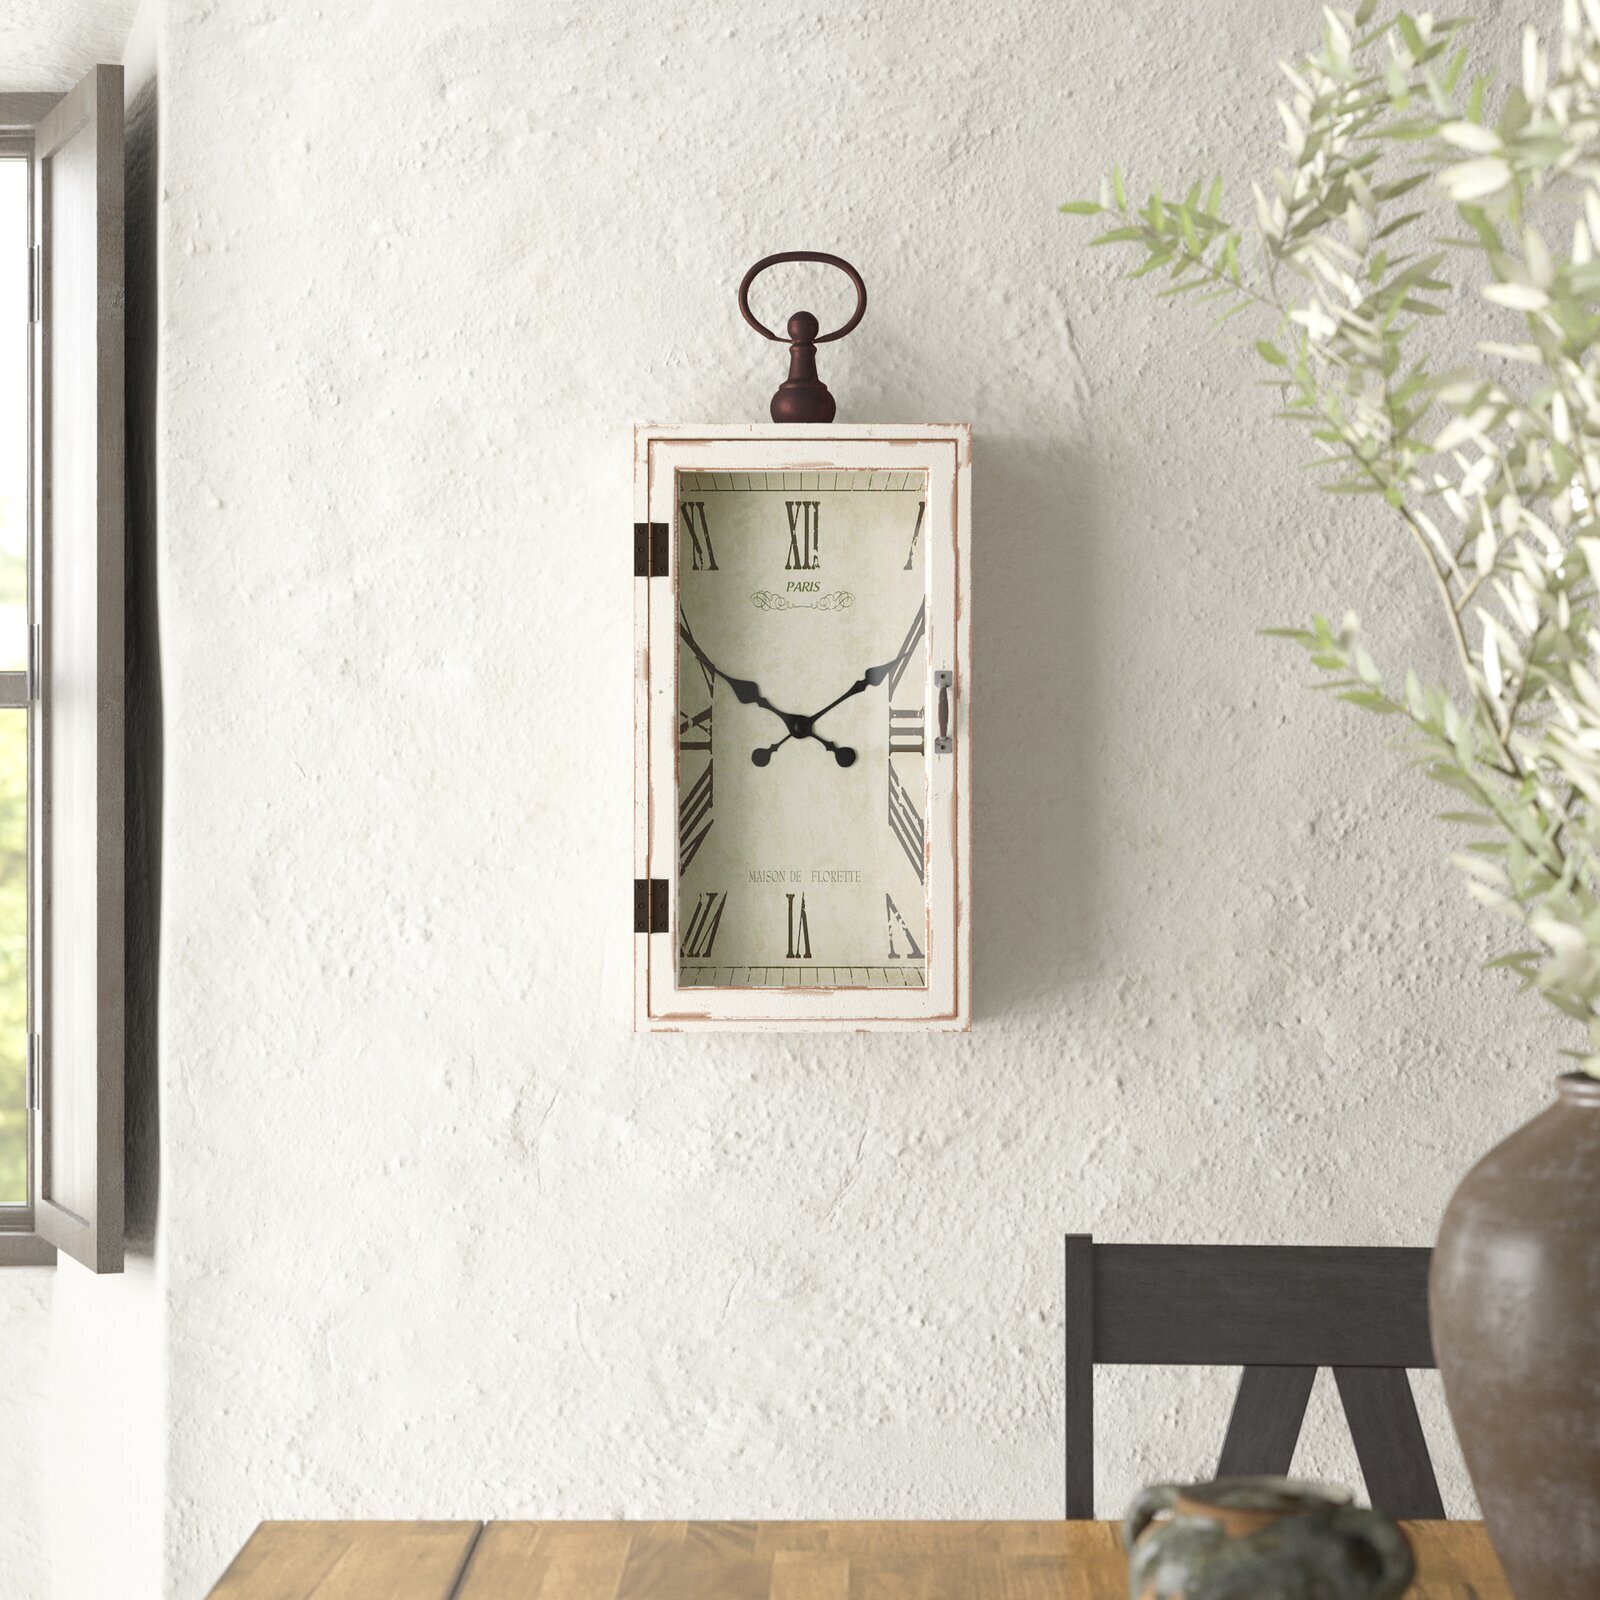 Long clock with a decorative, frame style case